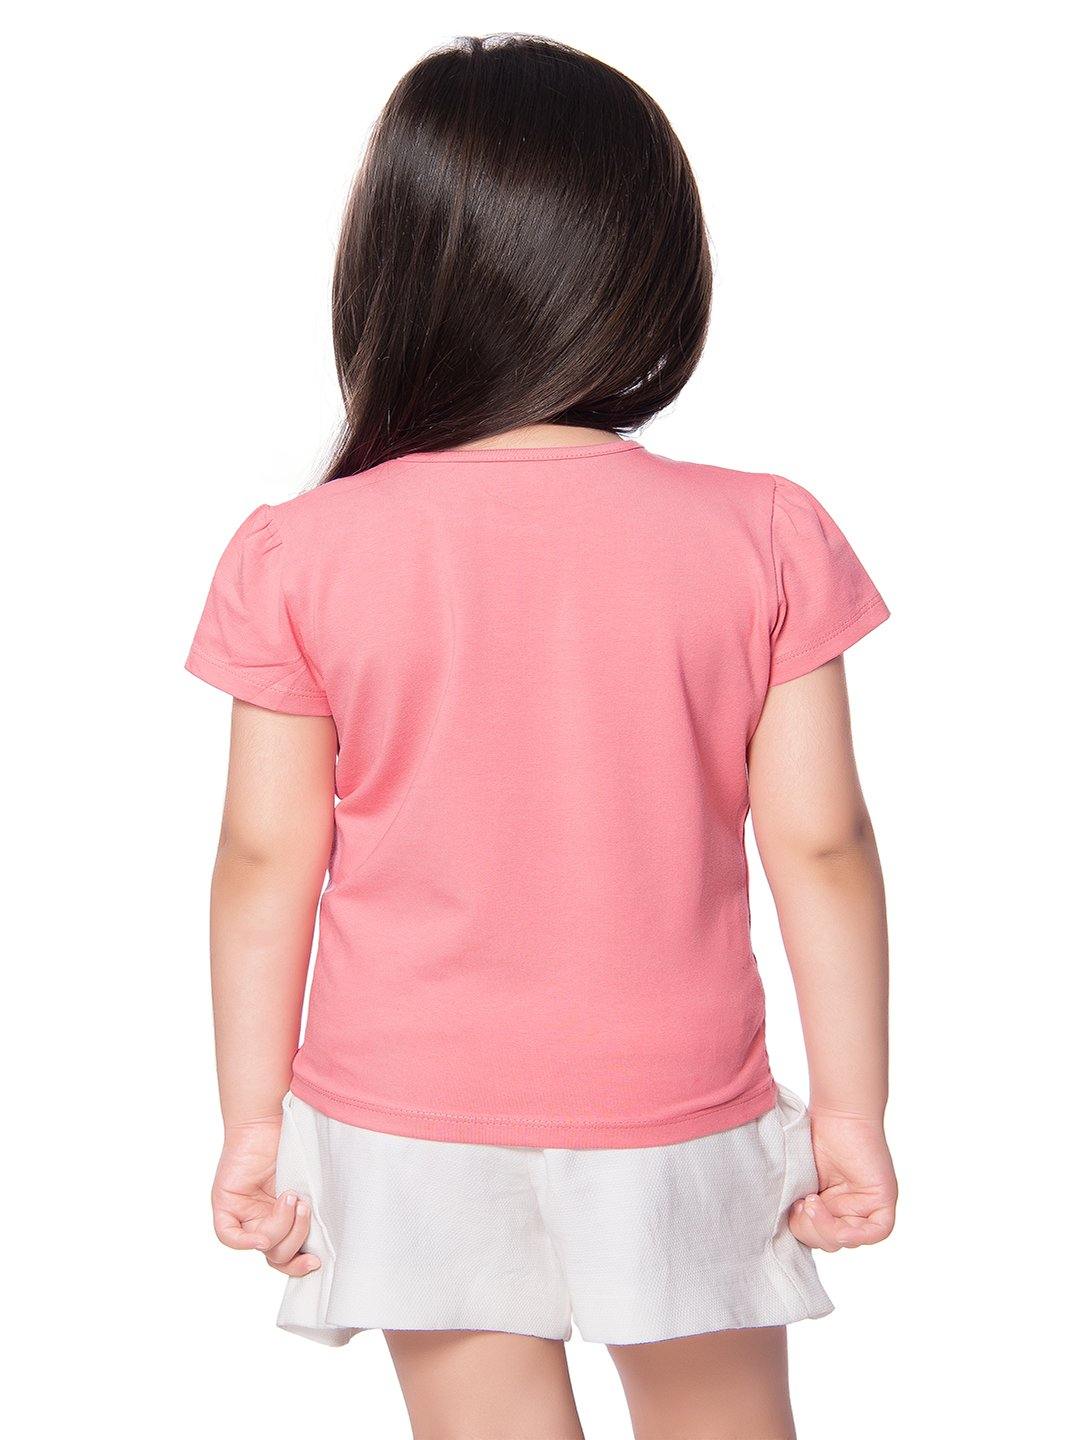 Tiny Baby Peach Colored Top - T-107 Peach - TINY BABY INDIA shop.tinybaby.in